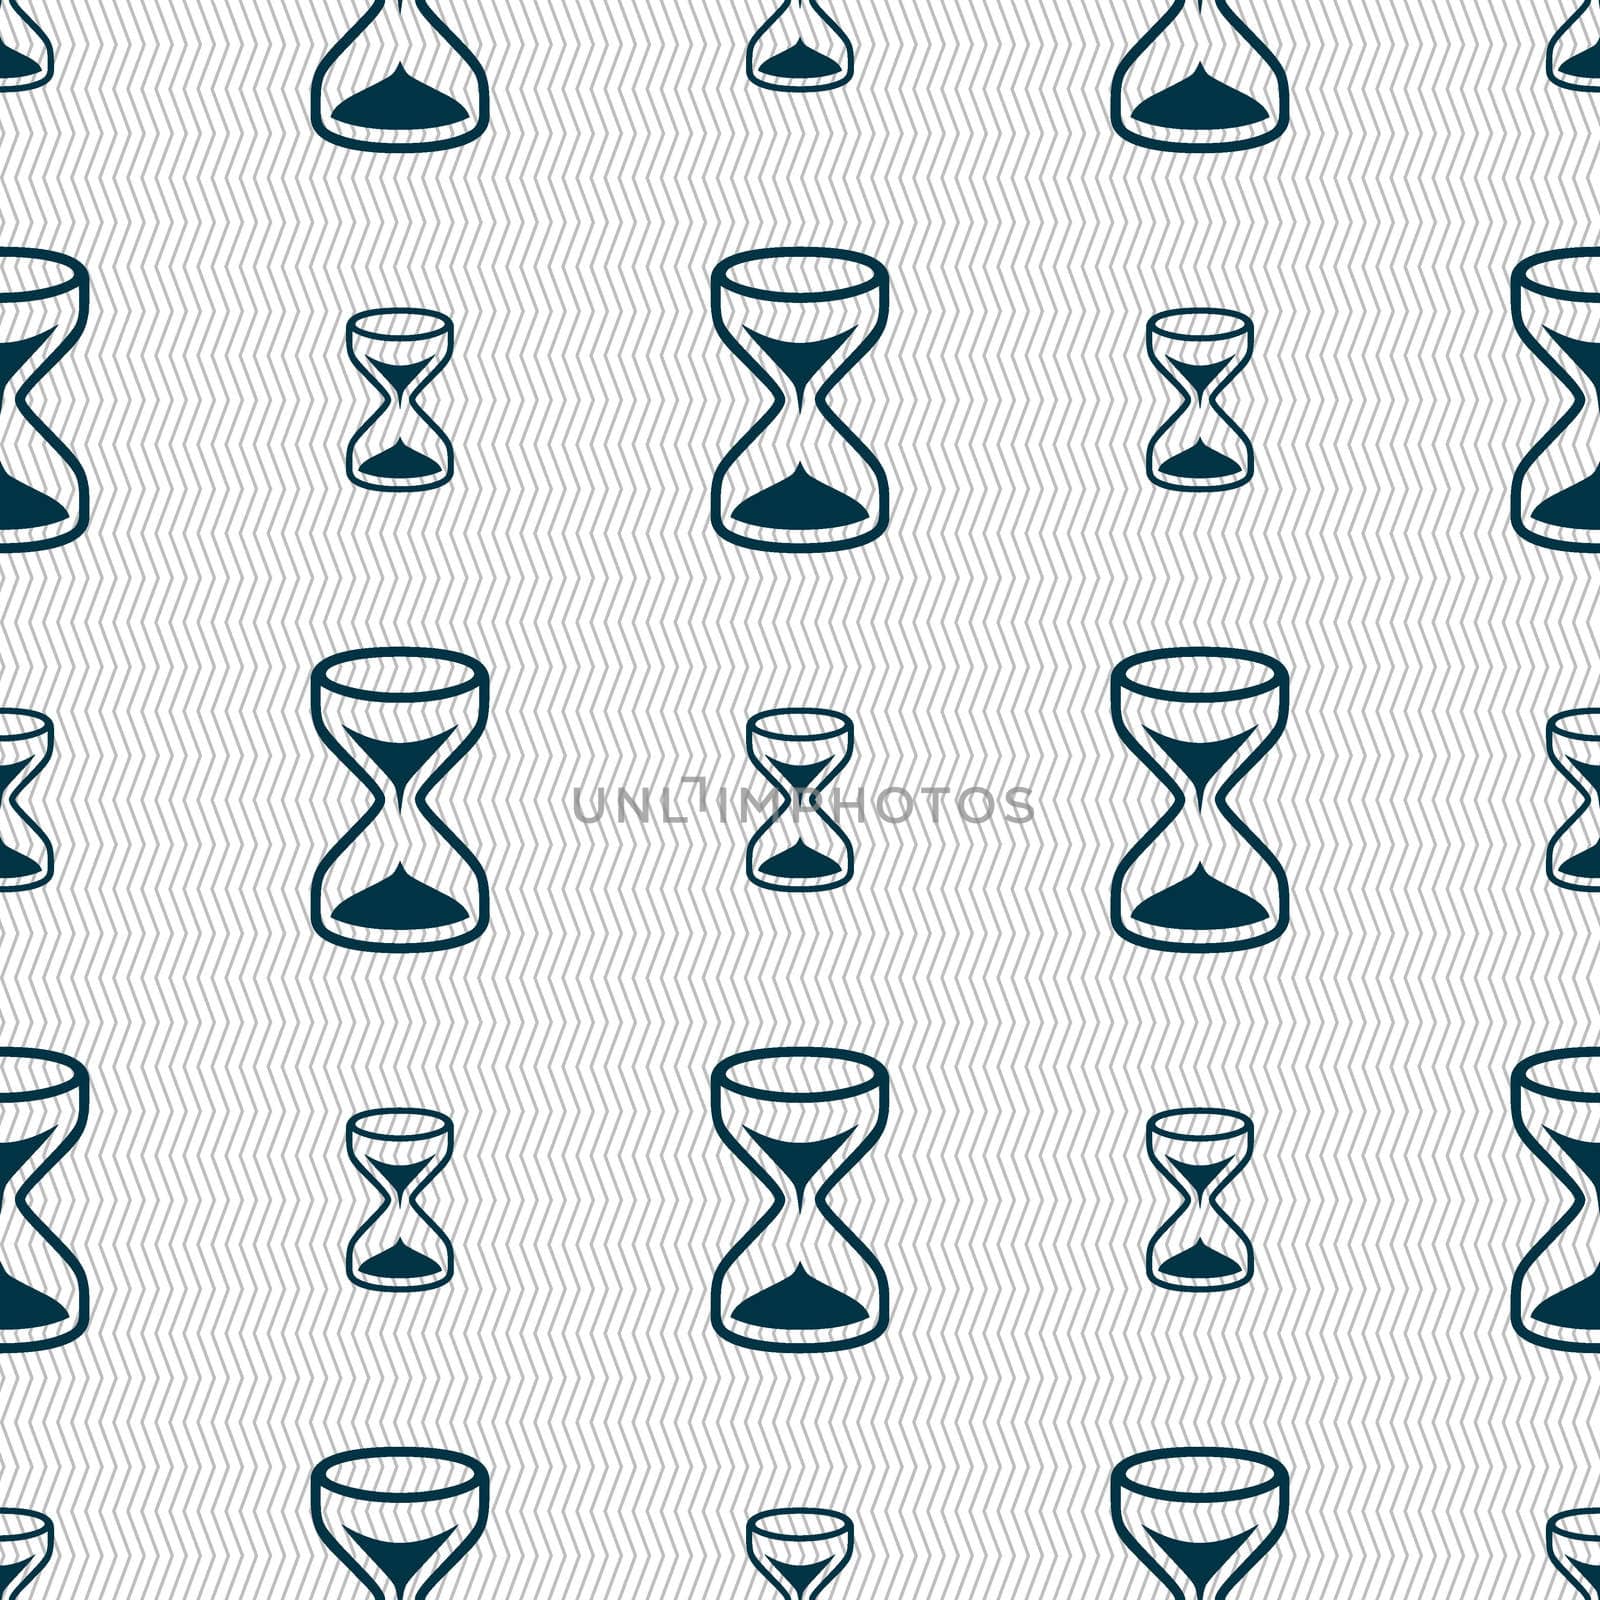 Hourglass sign icon. Sand timer symbol. Seamless abstract background with geometric shapes.  by serhii_lohvyniuk